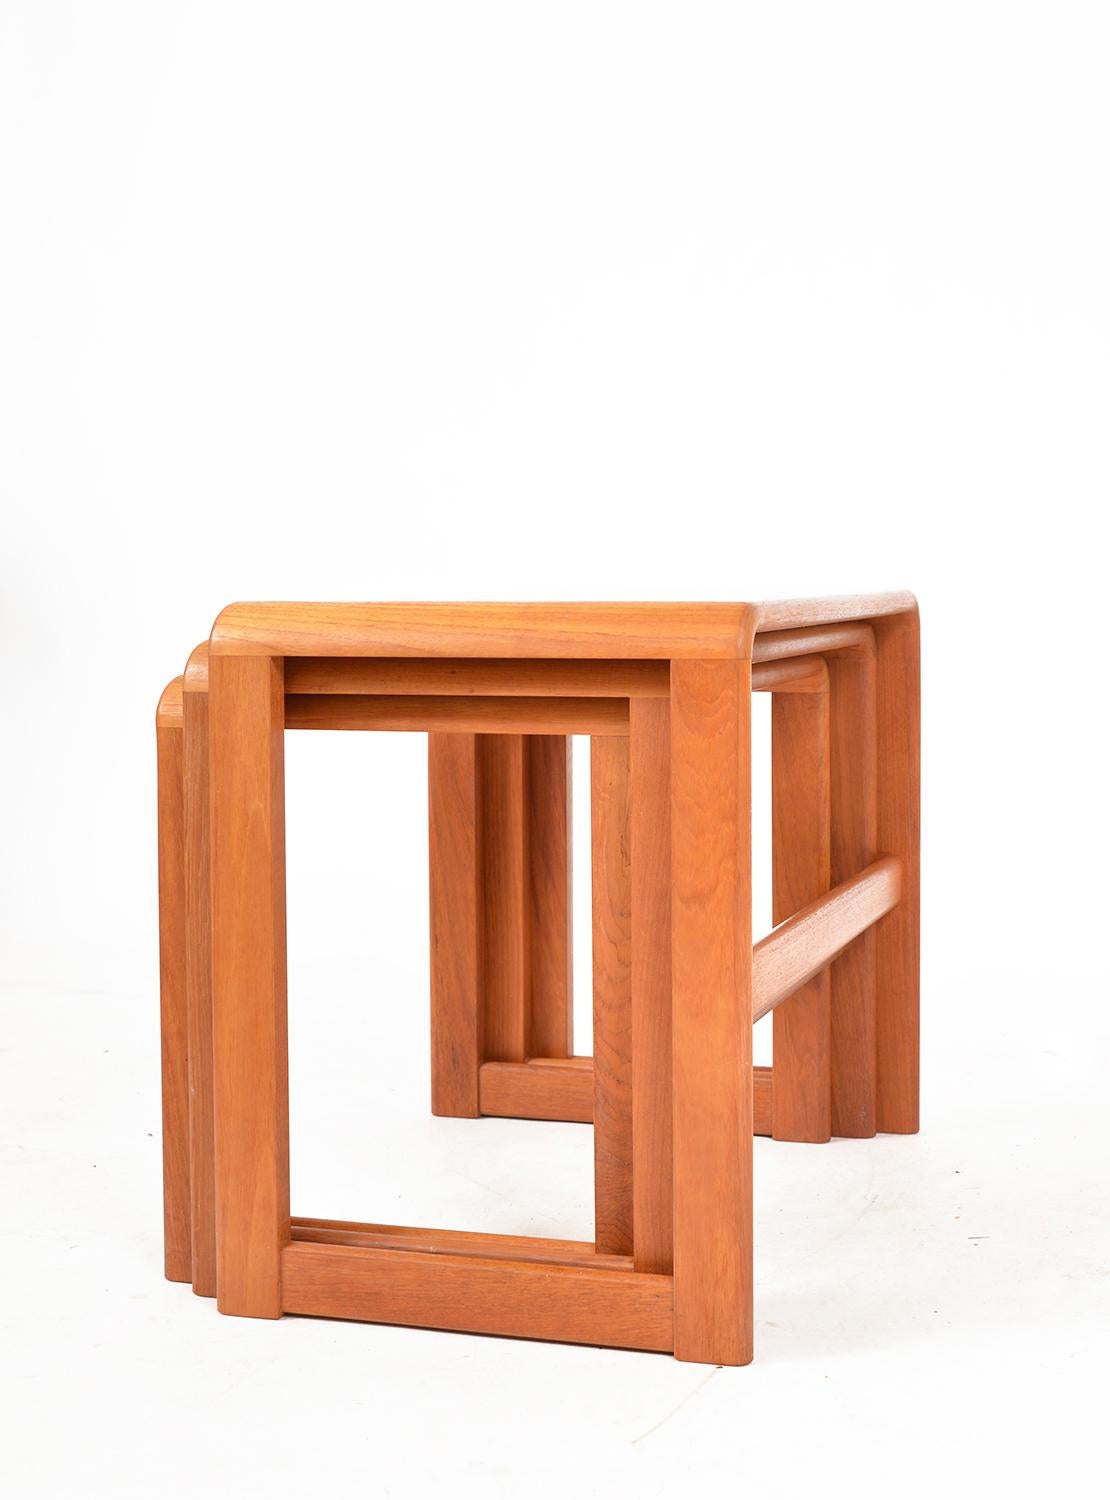 20th Century Midcentury Teak Nesting Occasional Tables by O'Donnell Design Irish 1970s Danish For Sale